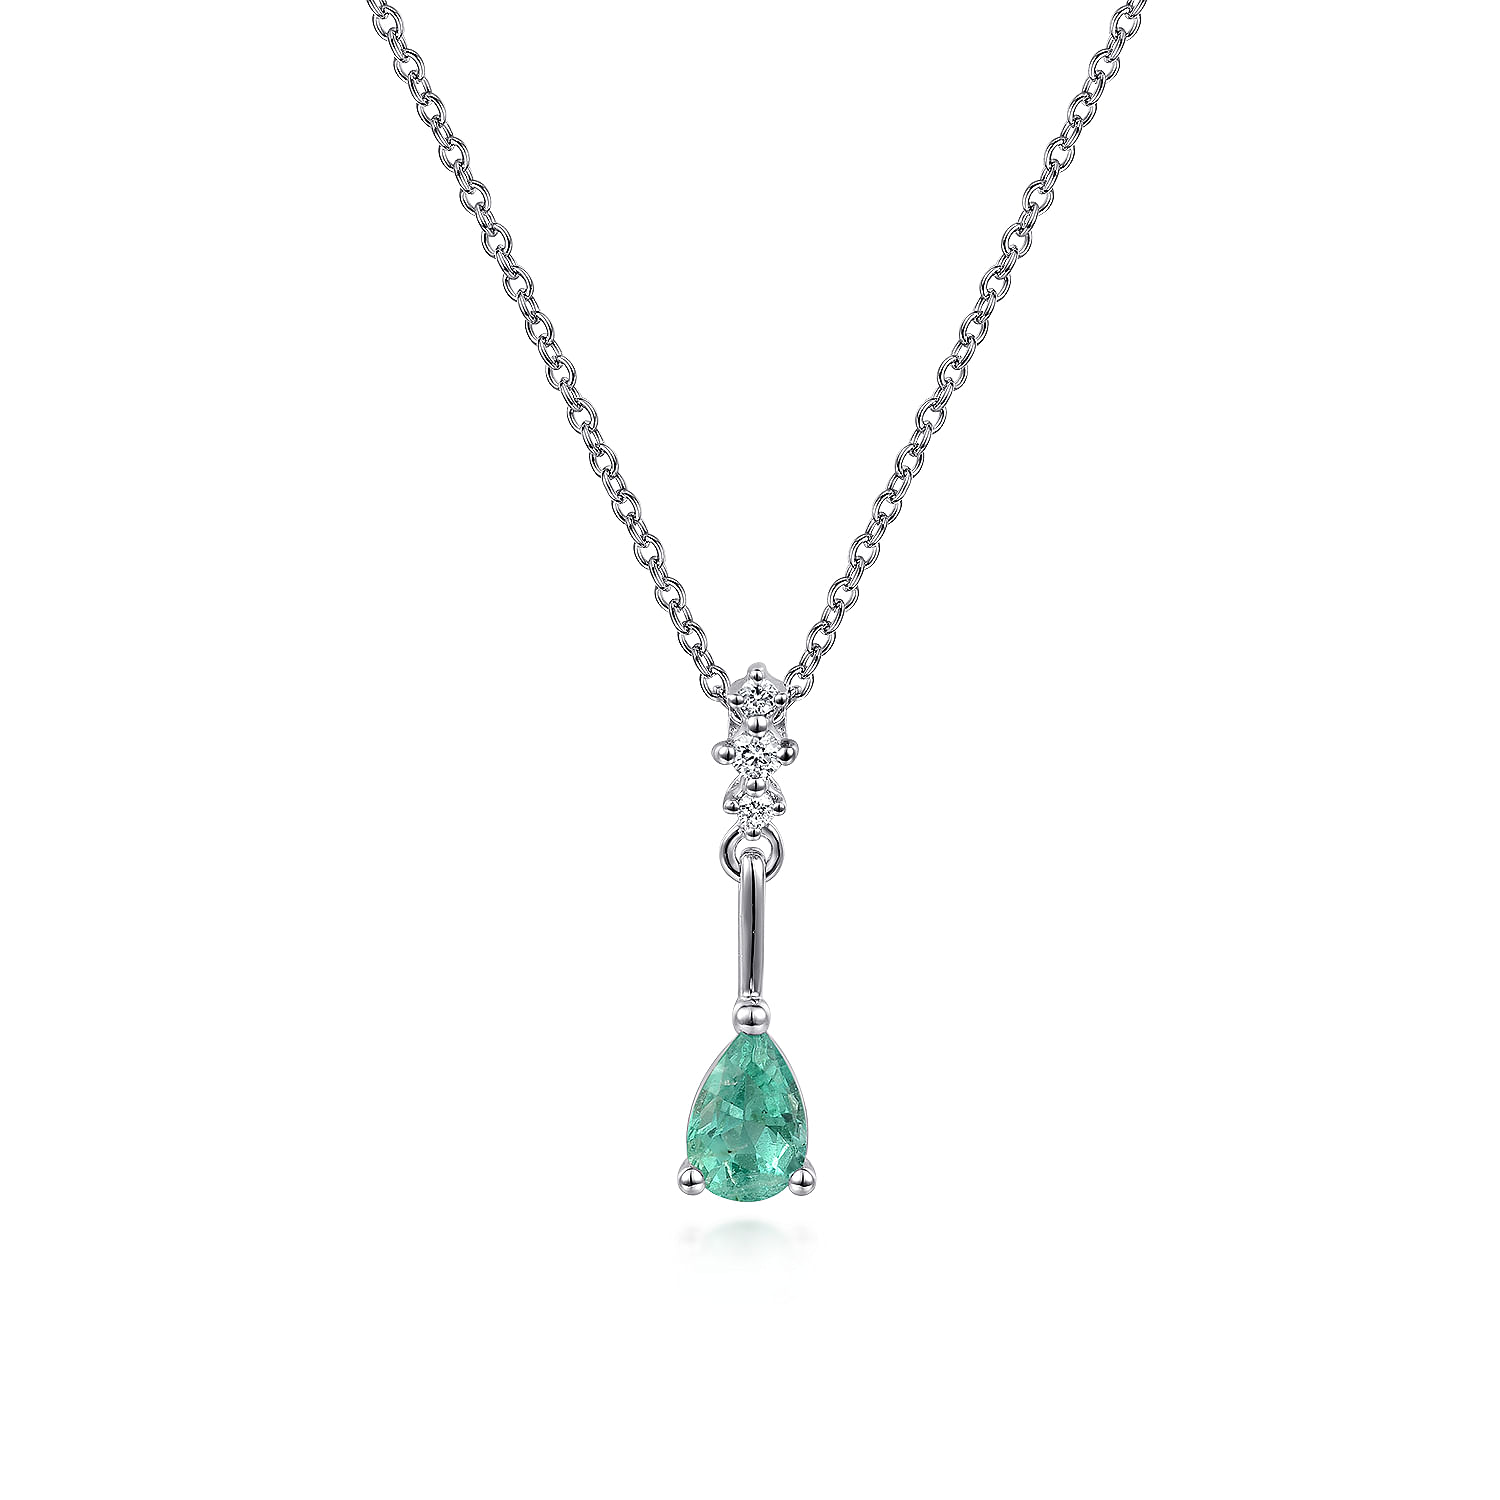 14K White Gold Pear Shaped Emerald and Diamond Drop Pendant Necklace